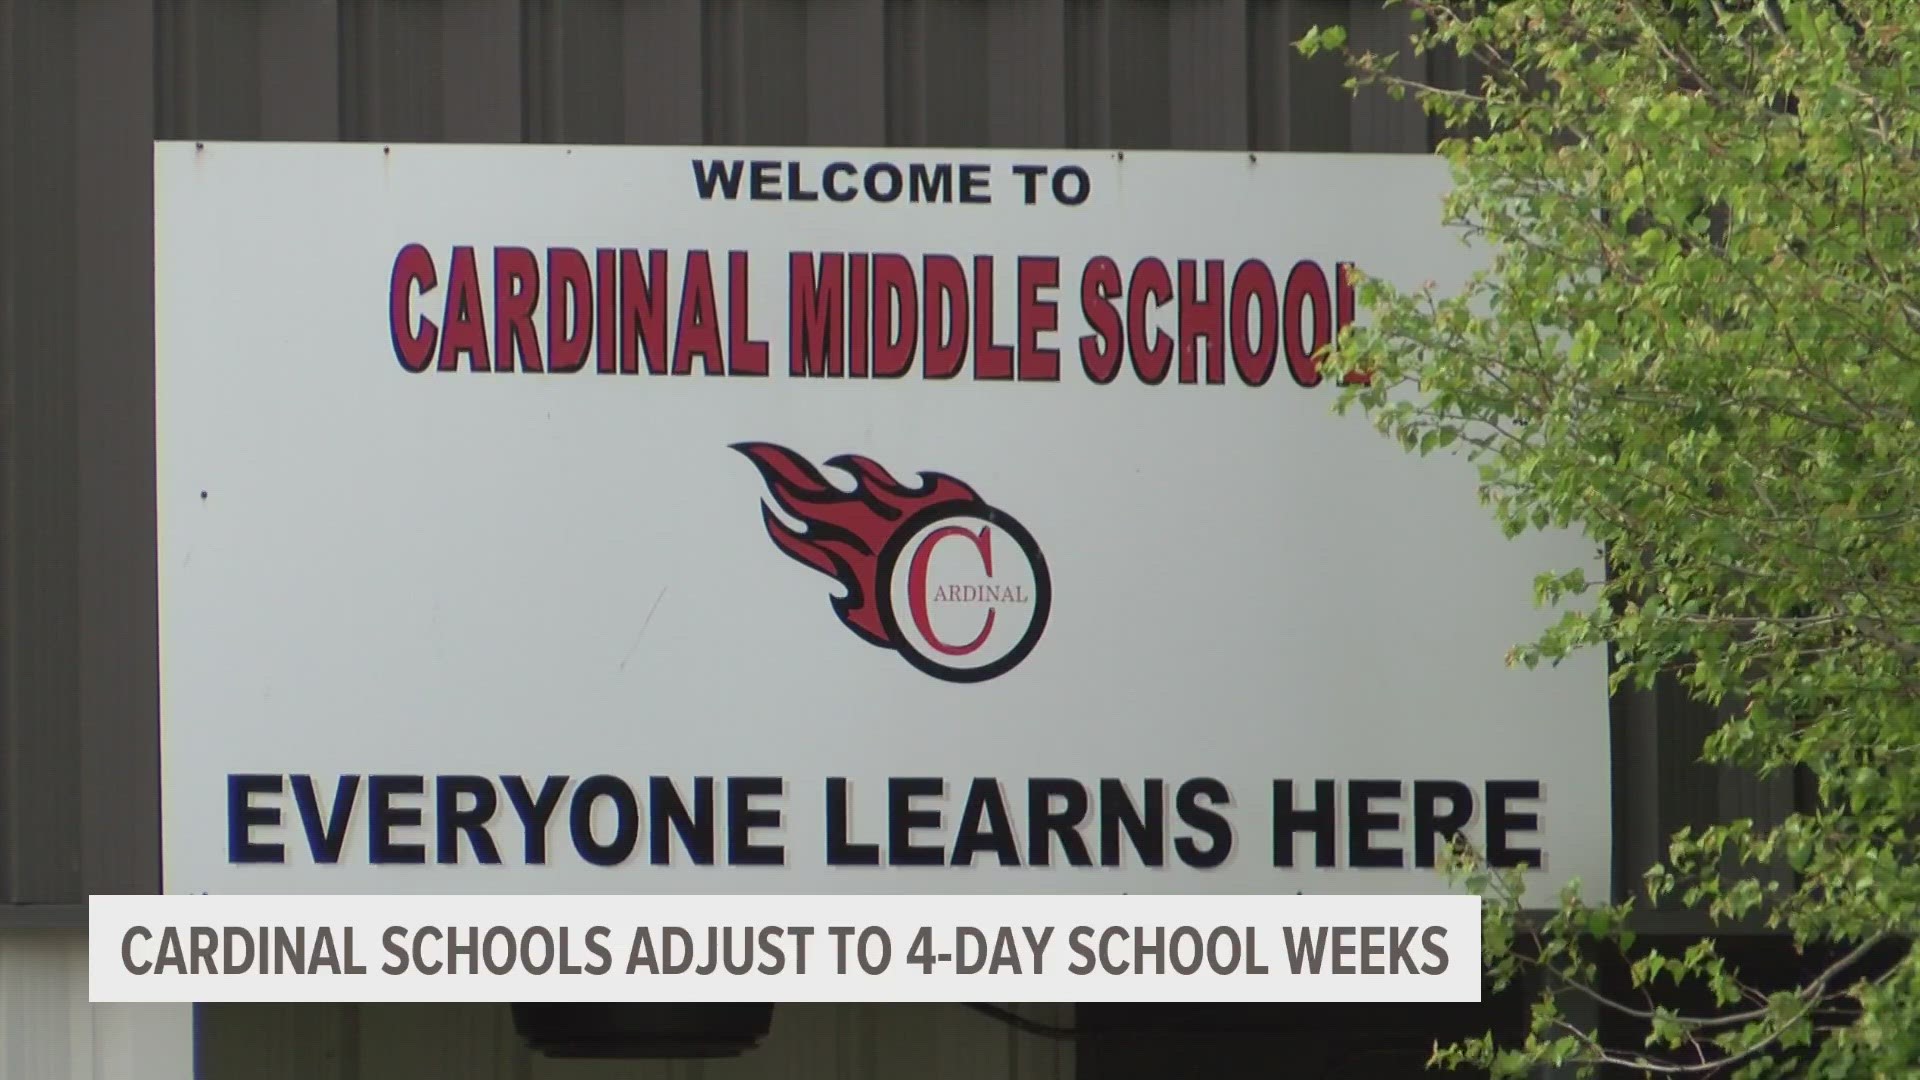 The Cardinal School District's superintendent shared what the change has been like for families, and how the school is working to retain teachers.